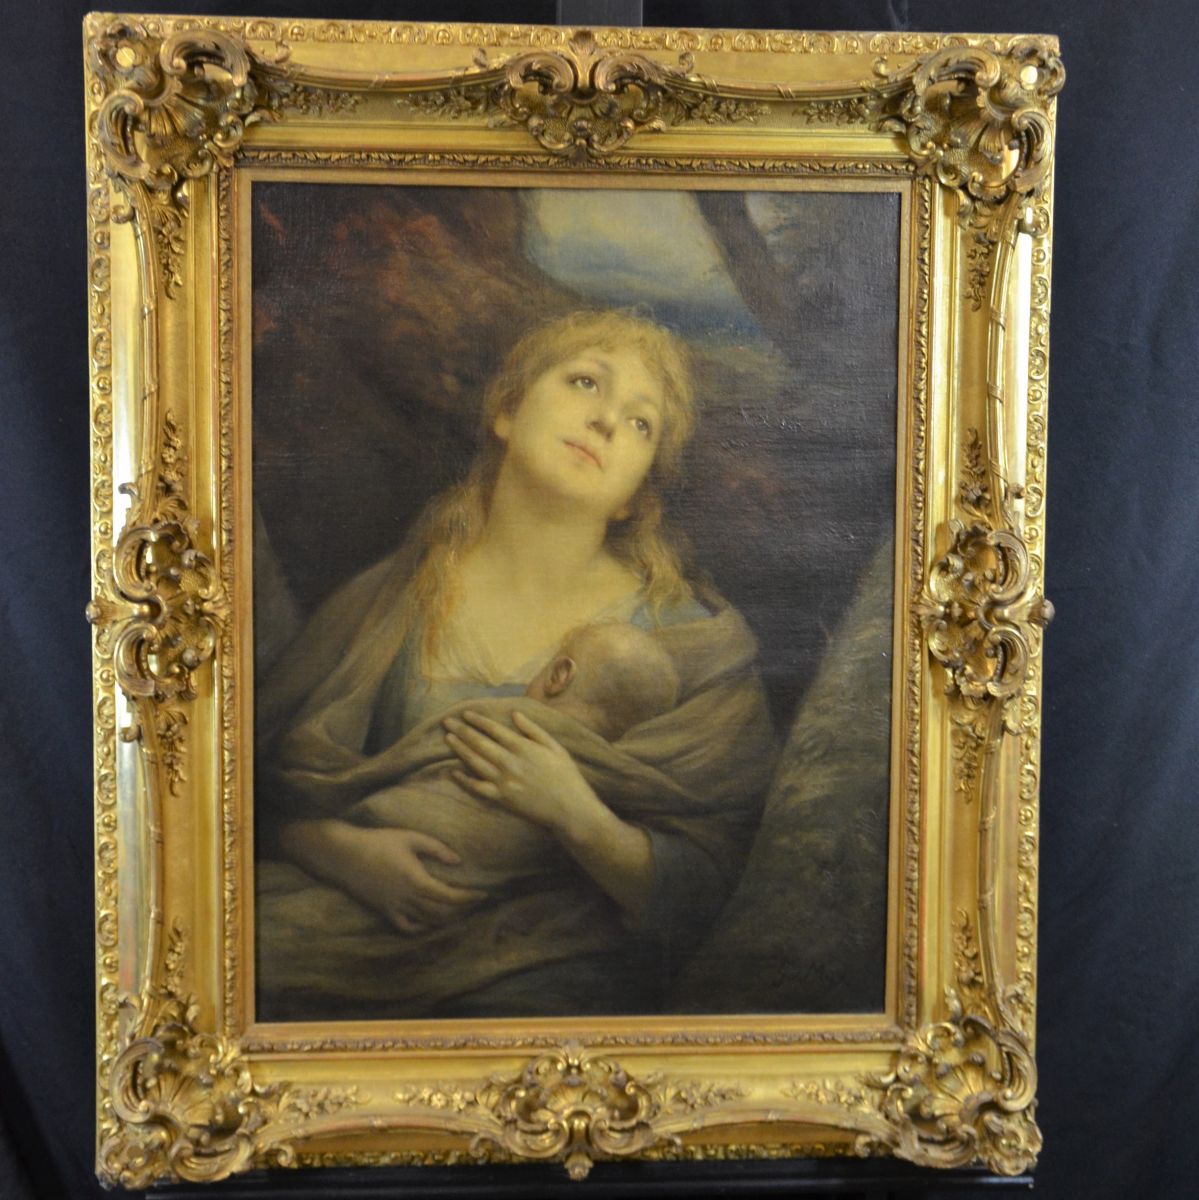  Oil on canvas Breastfeeding mother, signed G. v. Max. Extensive leaf gilded baroque frame with...